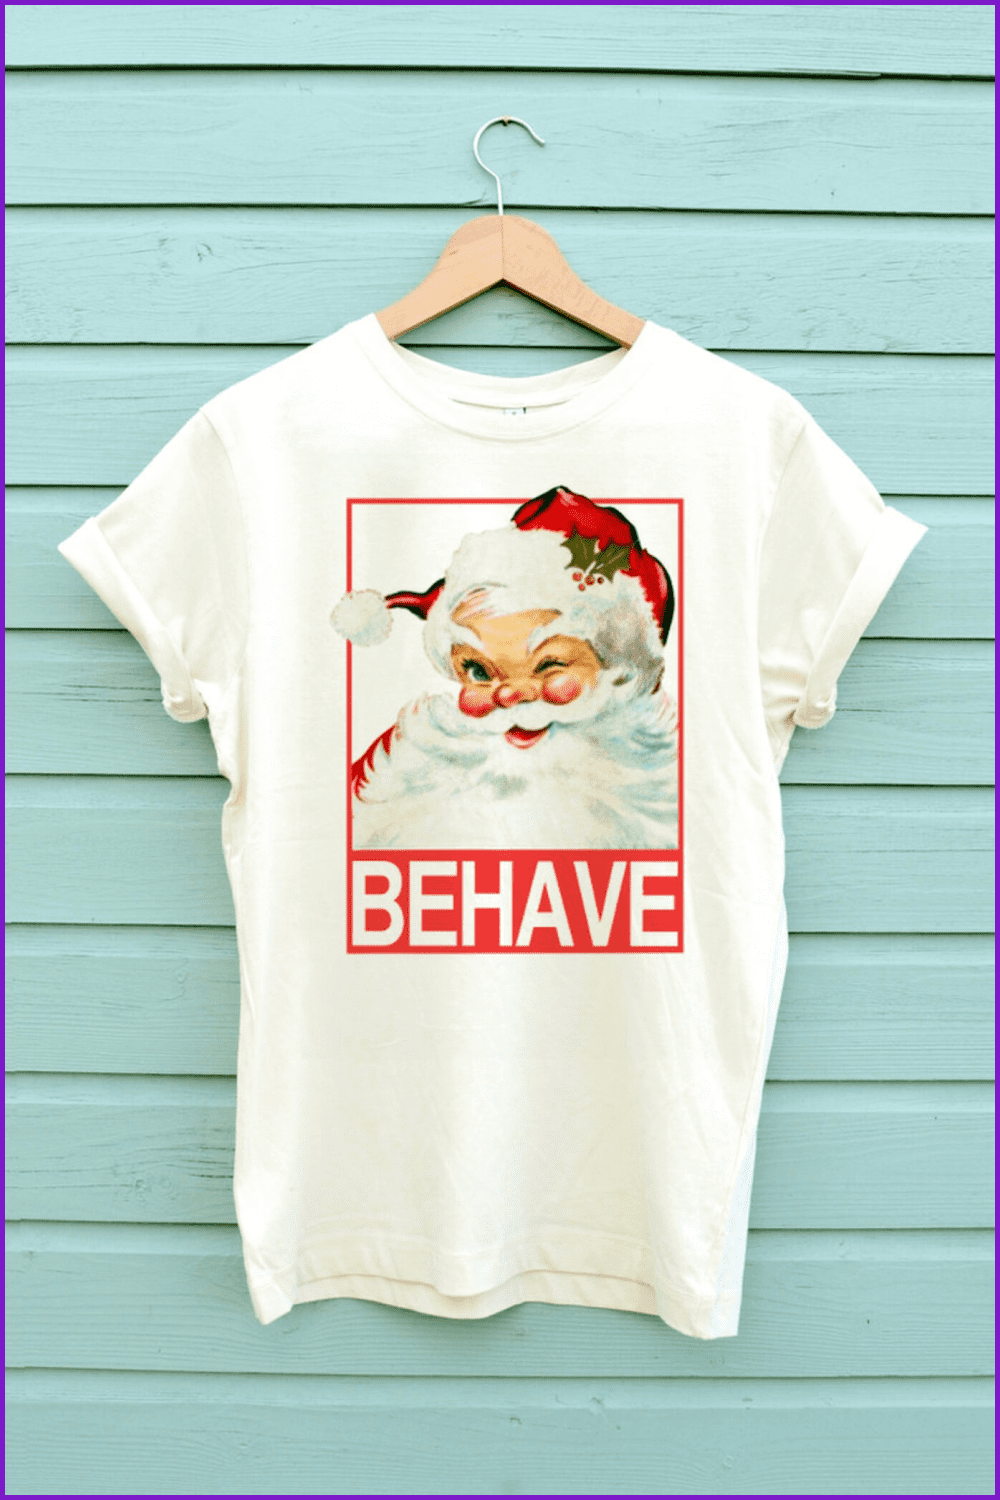 White t-shirt with the vintage Santa Claus.